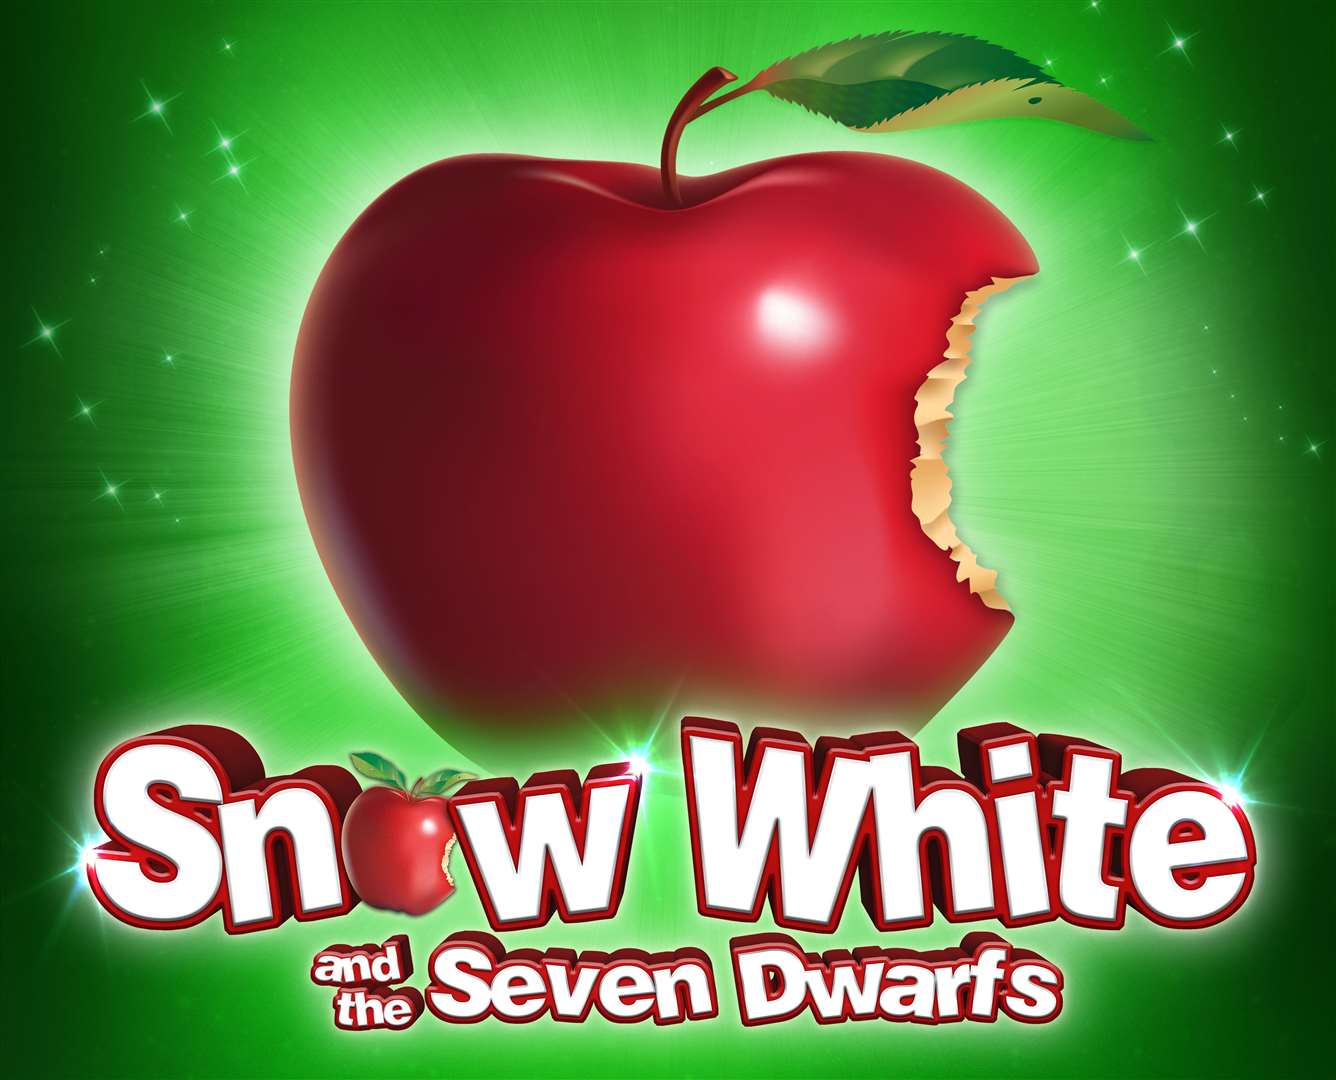 Snow White at the Assembly Hall Theatre, Tunbridge Wells has been postponed